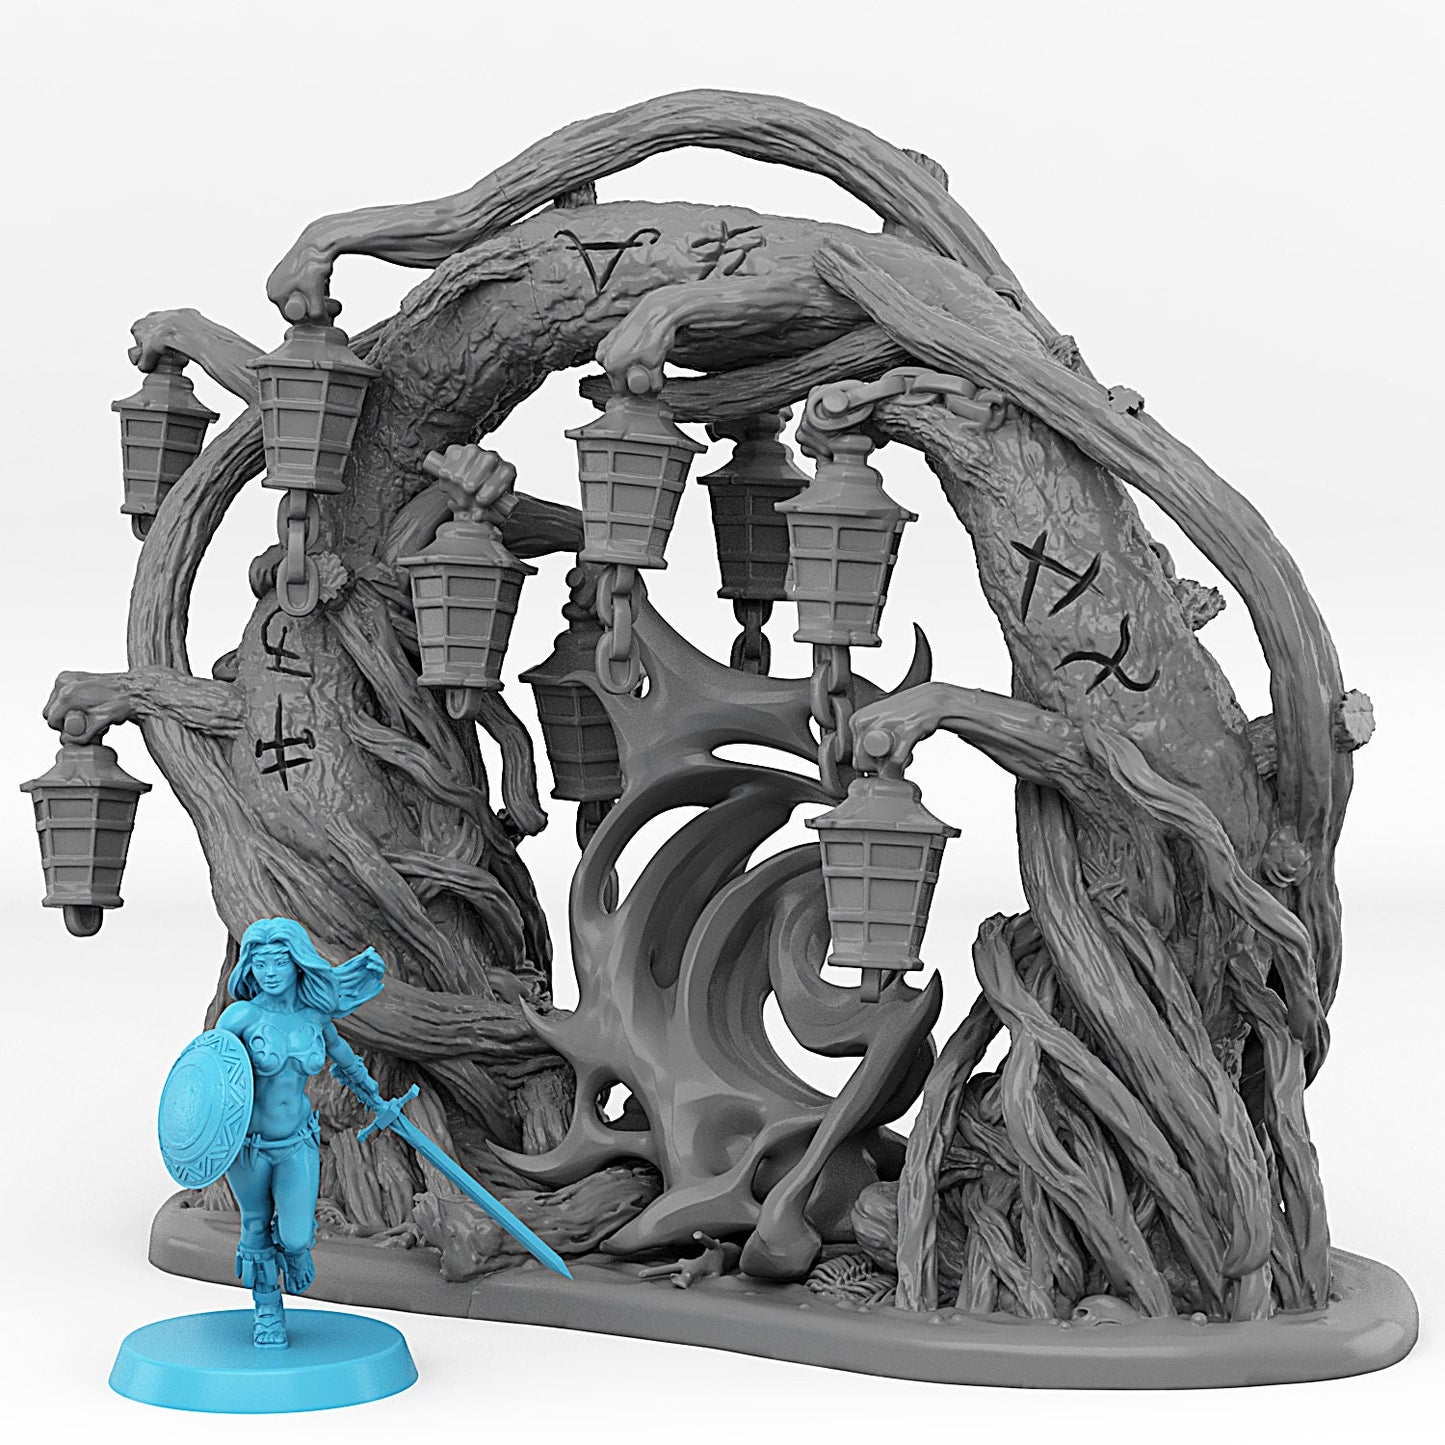 Creepy Forest Portal | Scenery and terrain | 3D Printed Resin Miniature | Tabletop Role Playing | AoS | D&D | 40K | Pathfinder